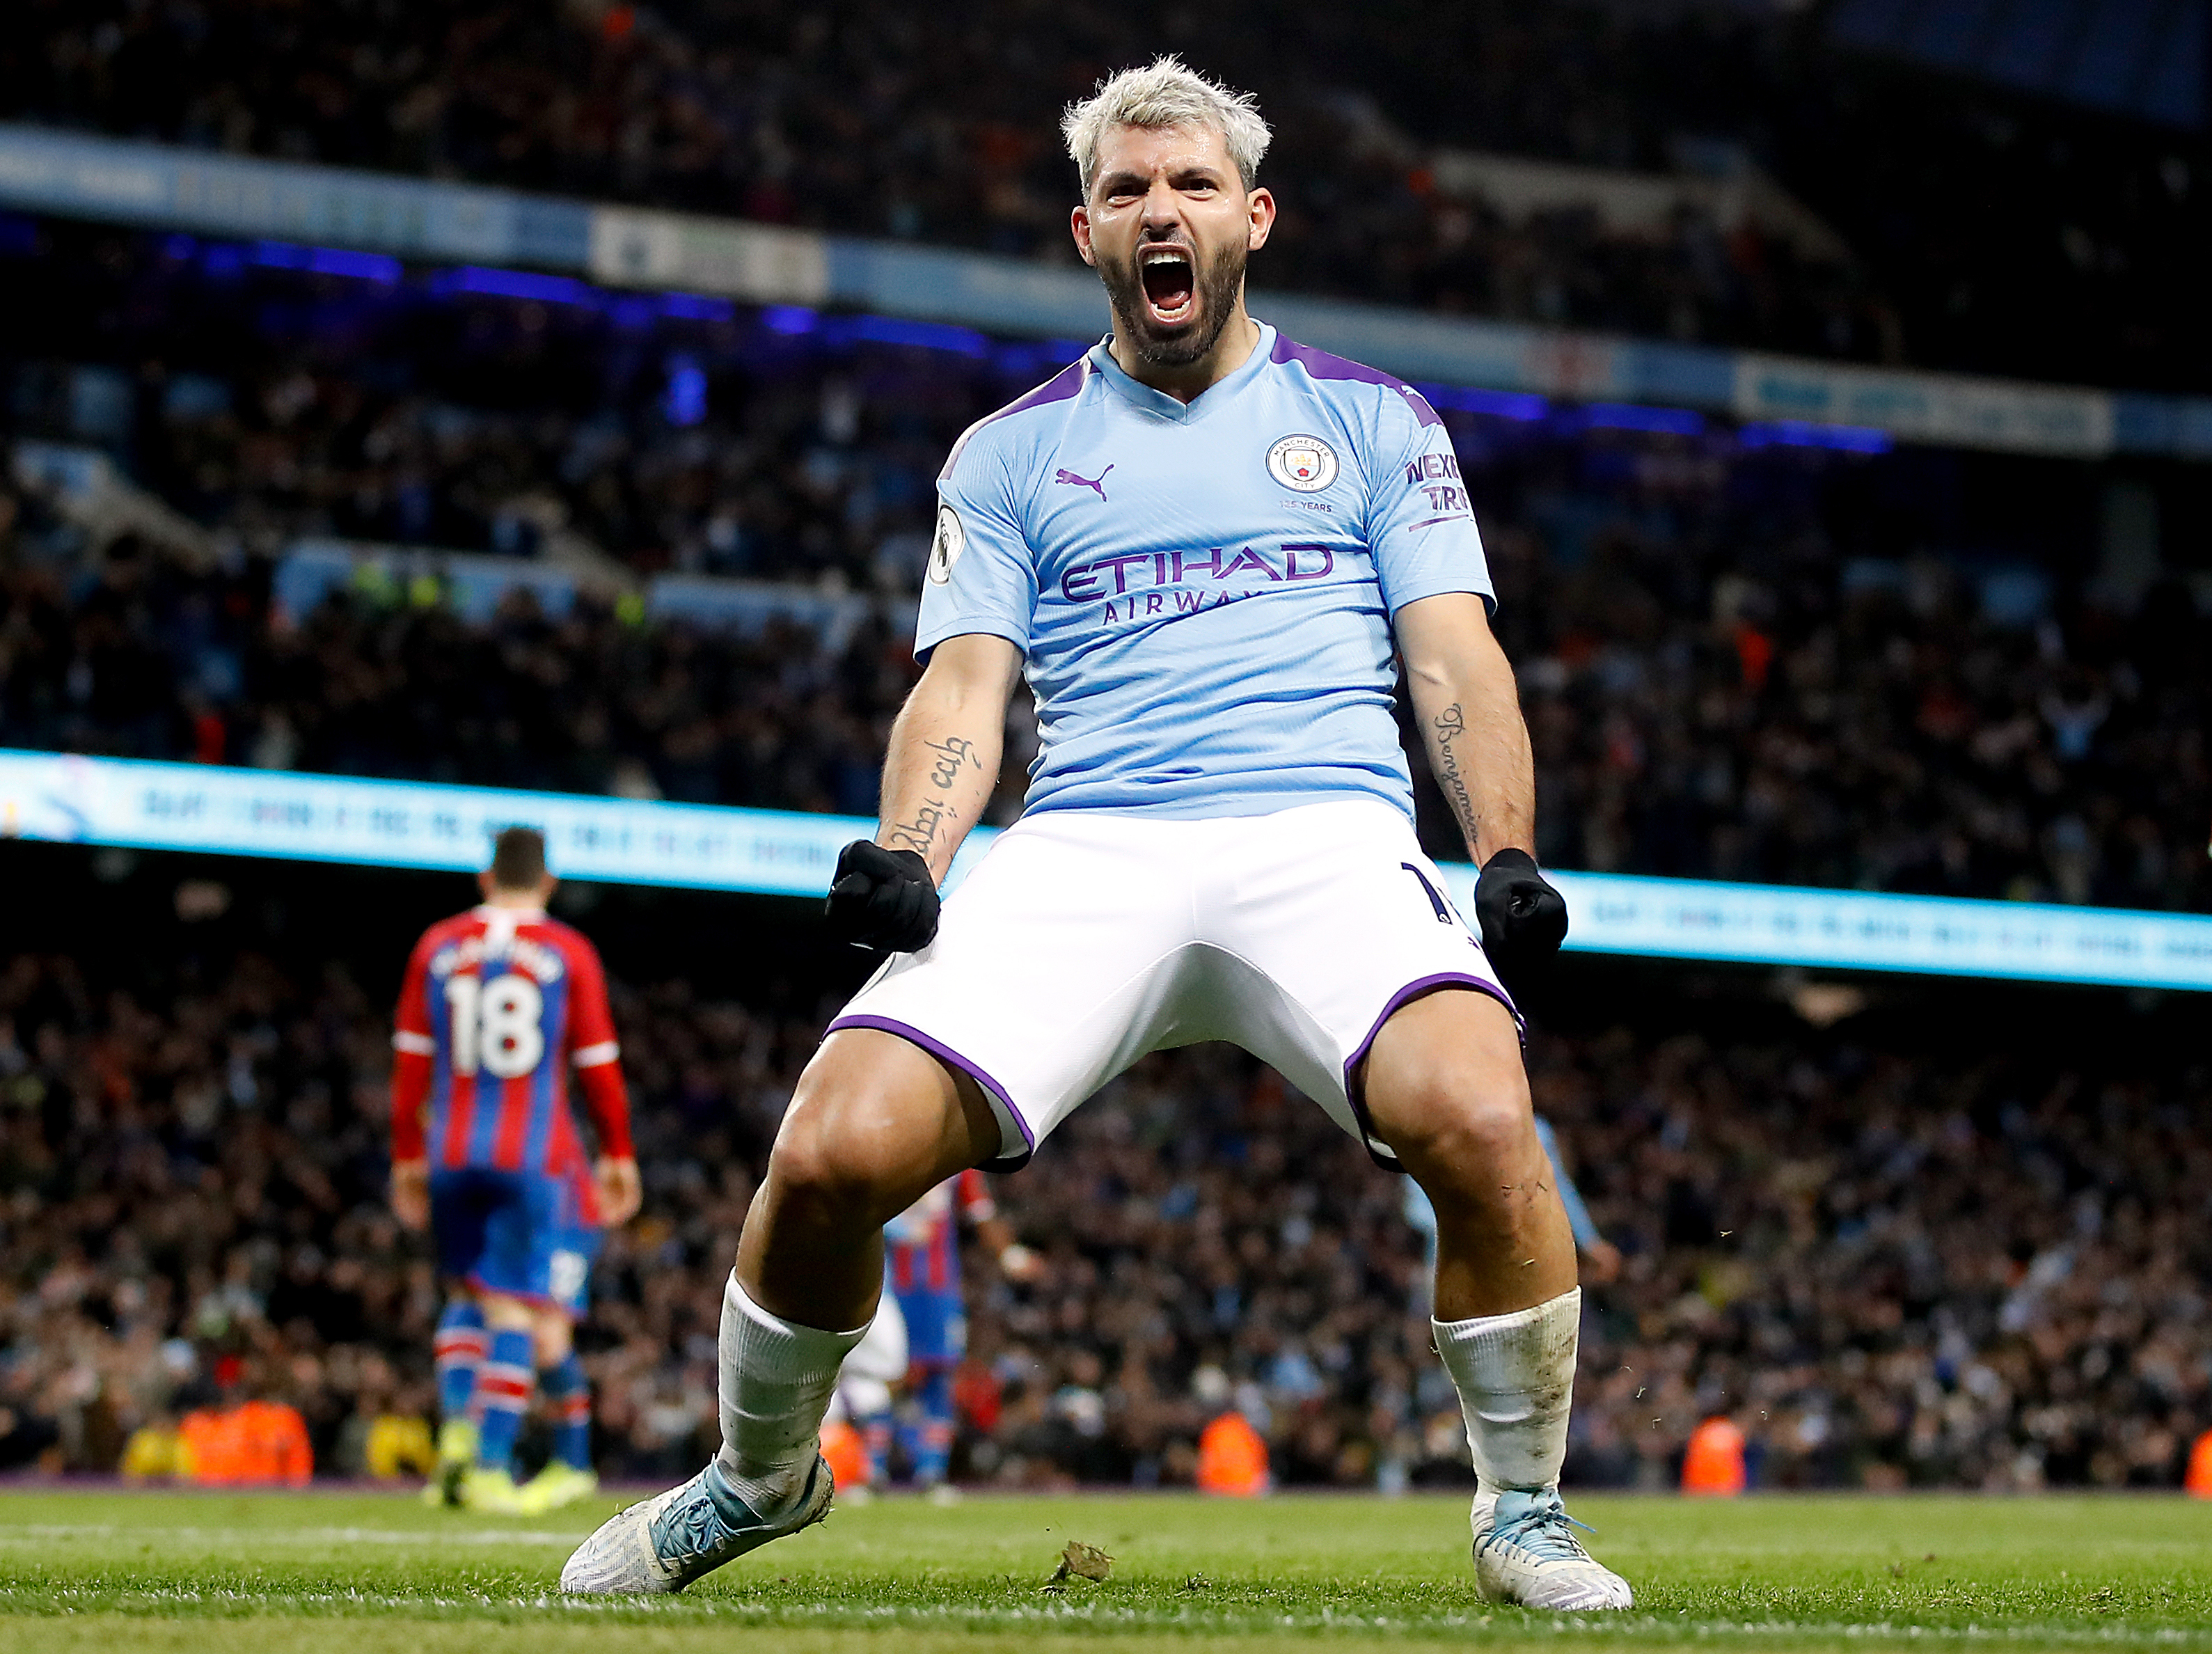 manchester city to sign 'the next sergio aguero', who has been in great goalscoring form: report